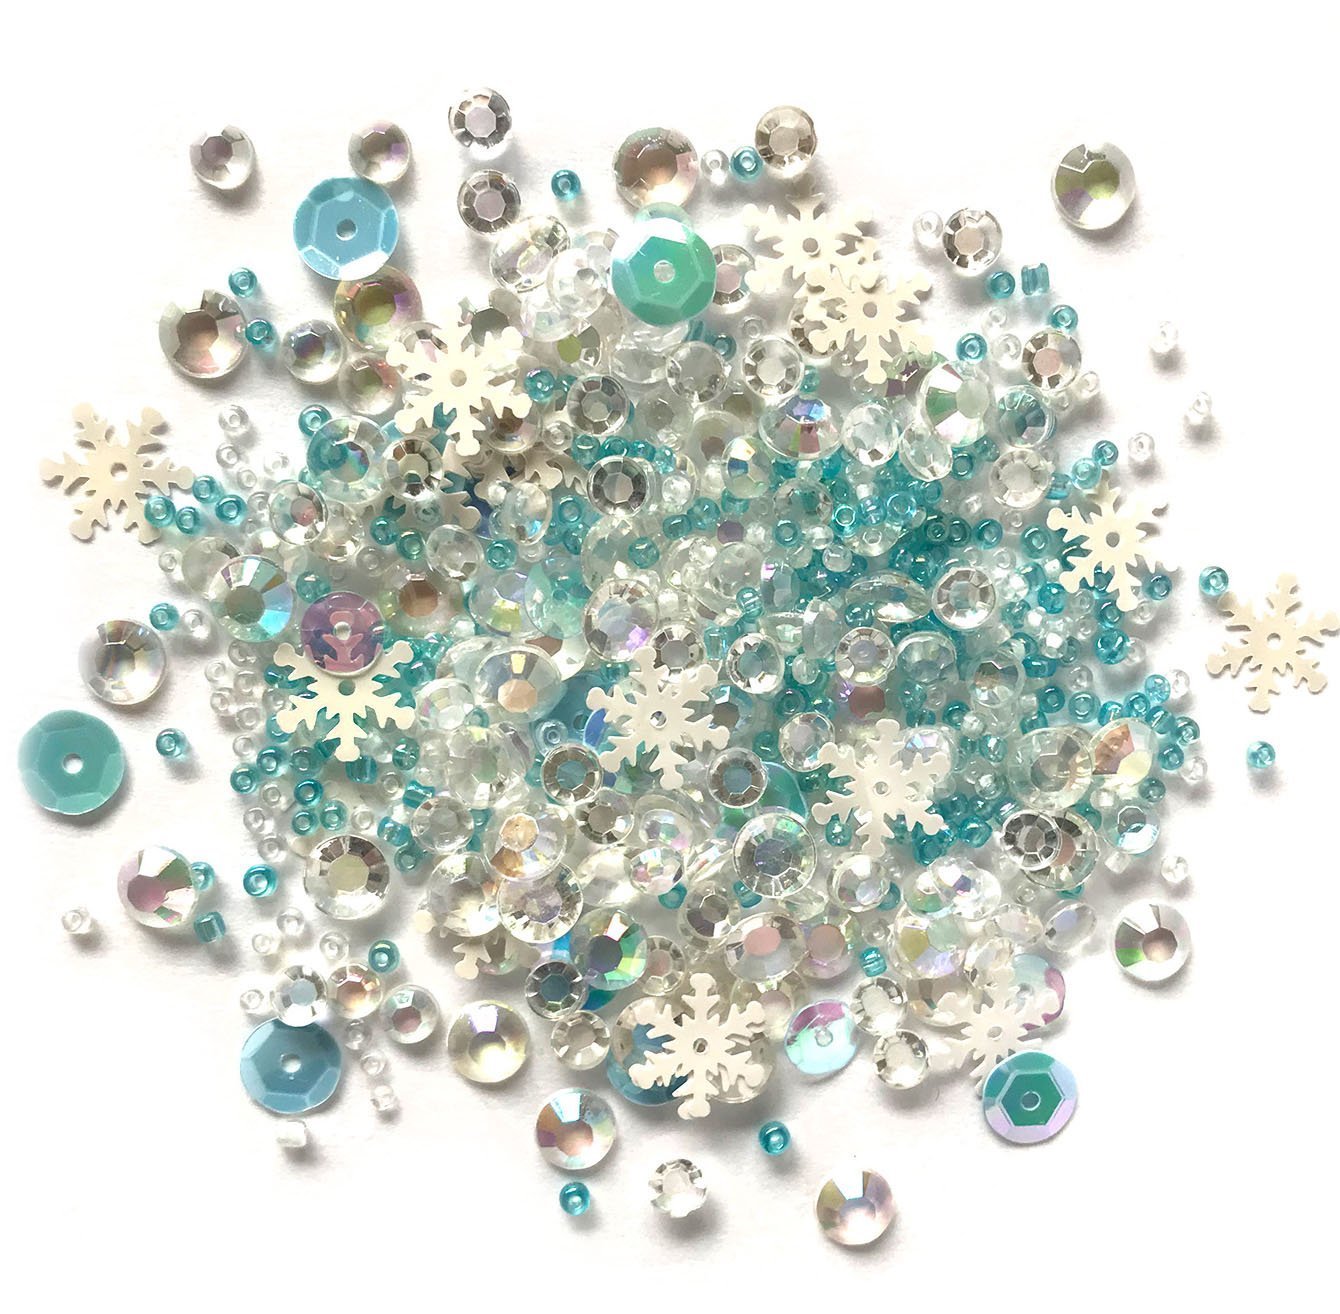 Buttons Galore Embellishments Iridescent Acrylic Gems, Shaped Sequins, Flat  Back Pearls Sparkletz for Crafts Sewing Paper Crafts - Winter Wonder- 3  Pack 30 Grams 